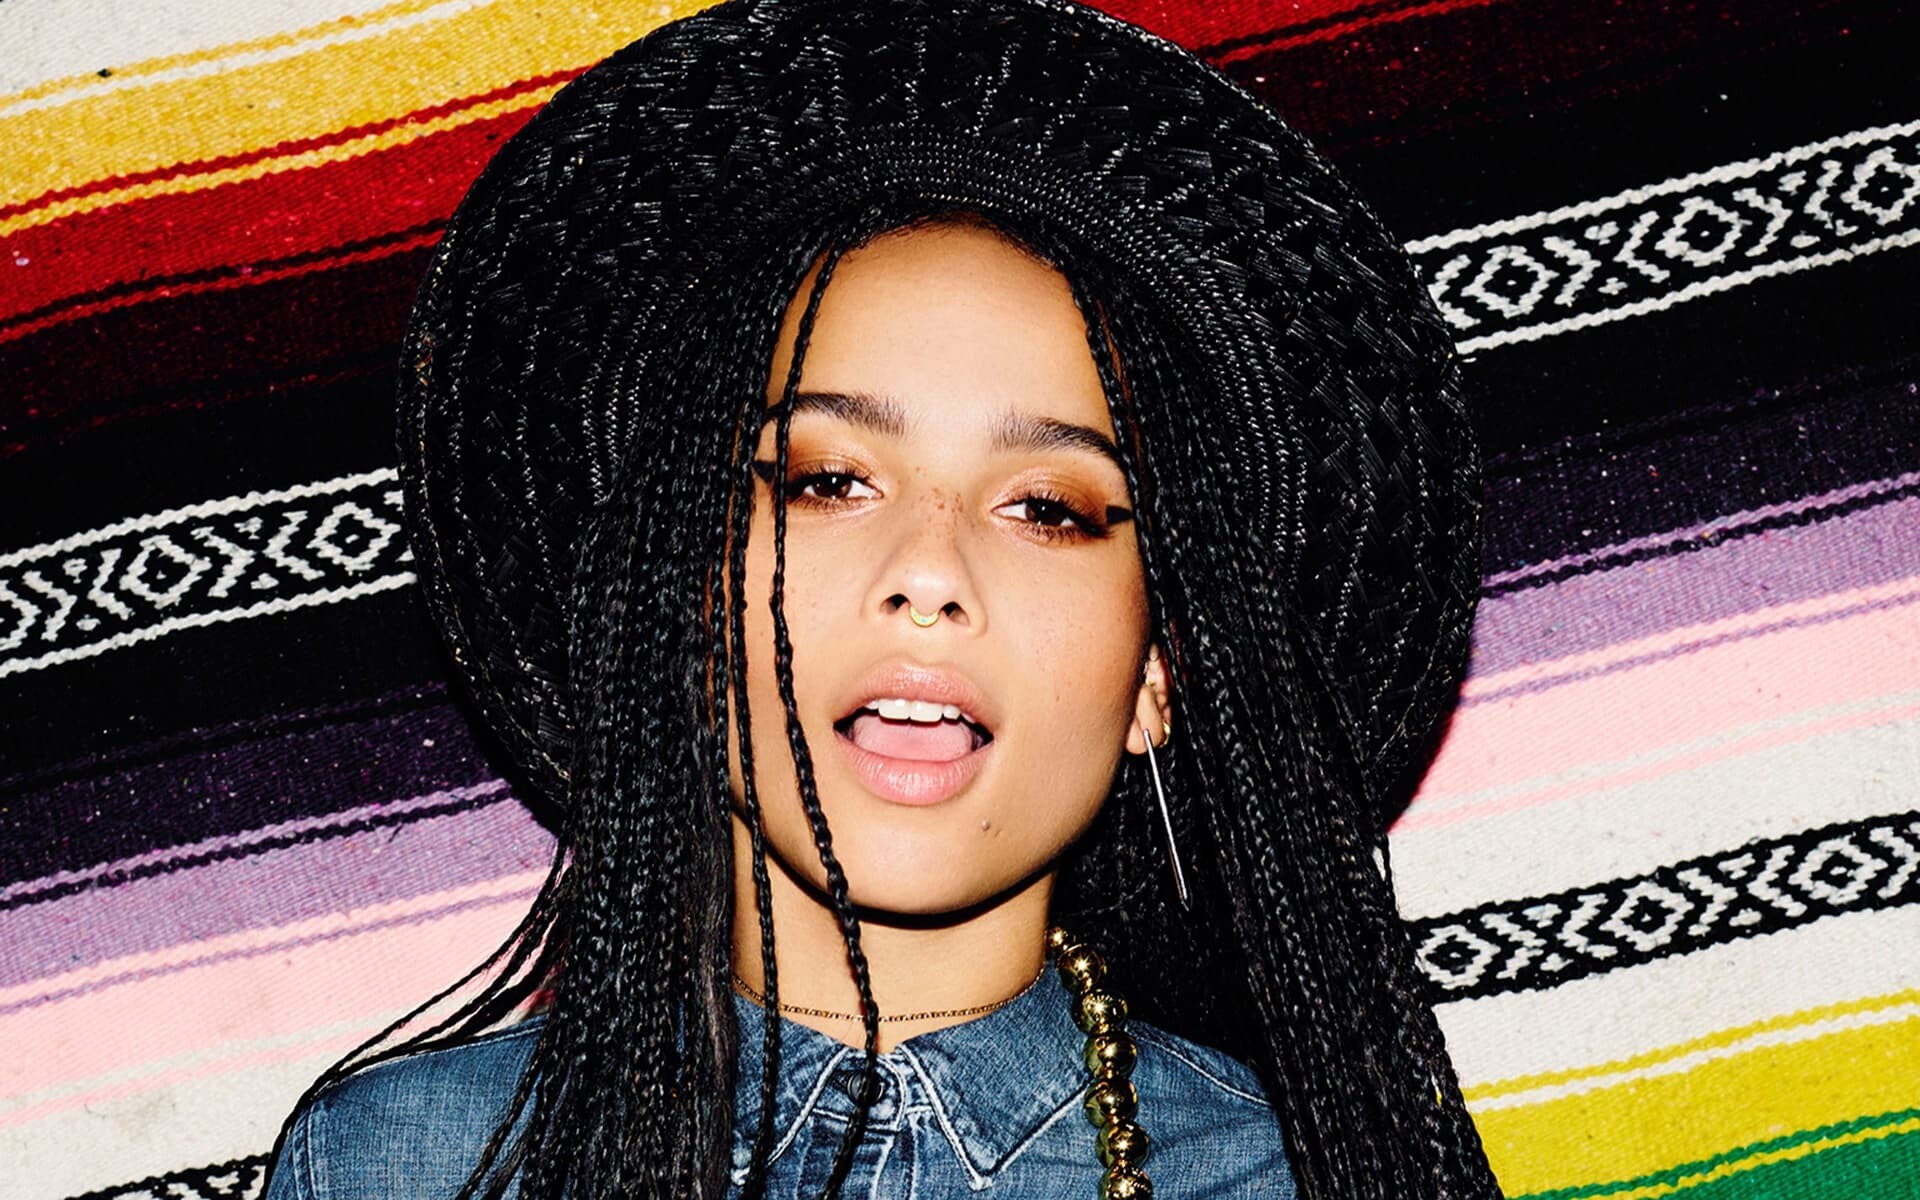 Zoe Kravitz: The daughter of singer Lenny Kravitz, Continued her family's legacy in the arts as a singer and actress. 1920x1200 HD Background.